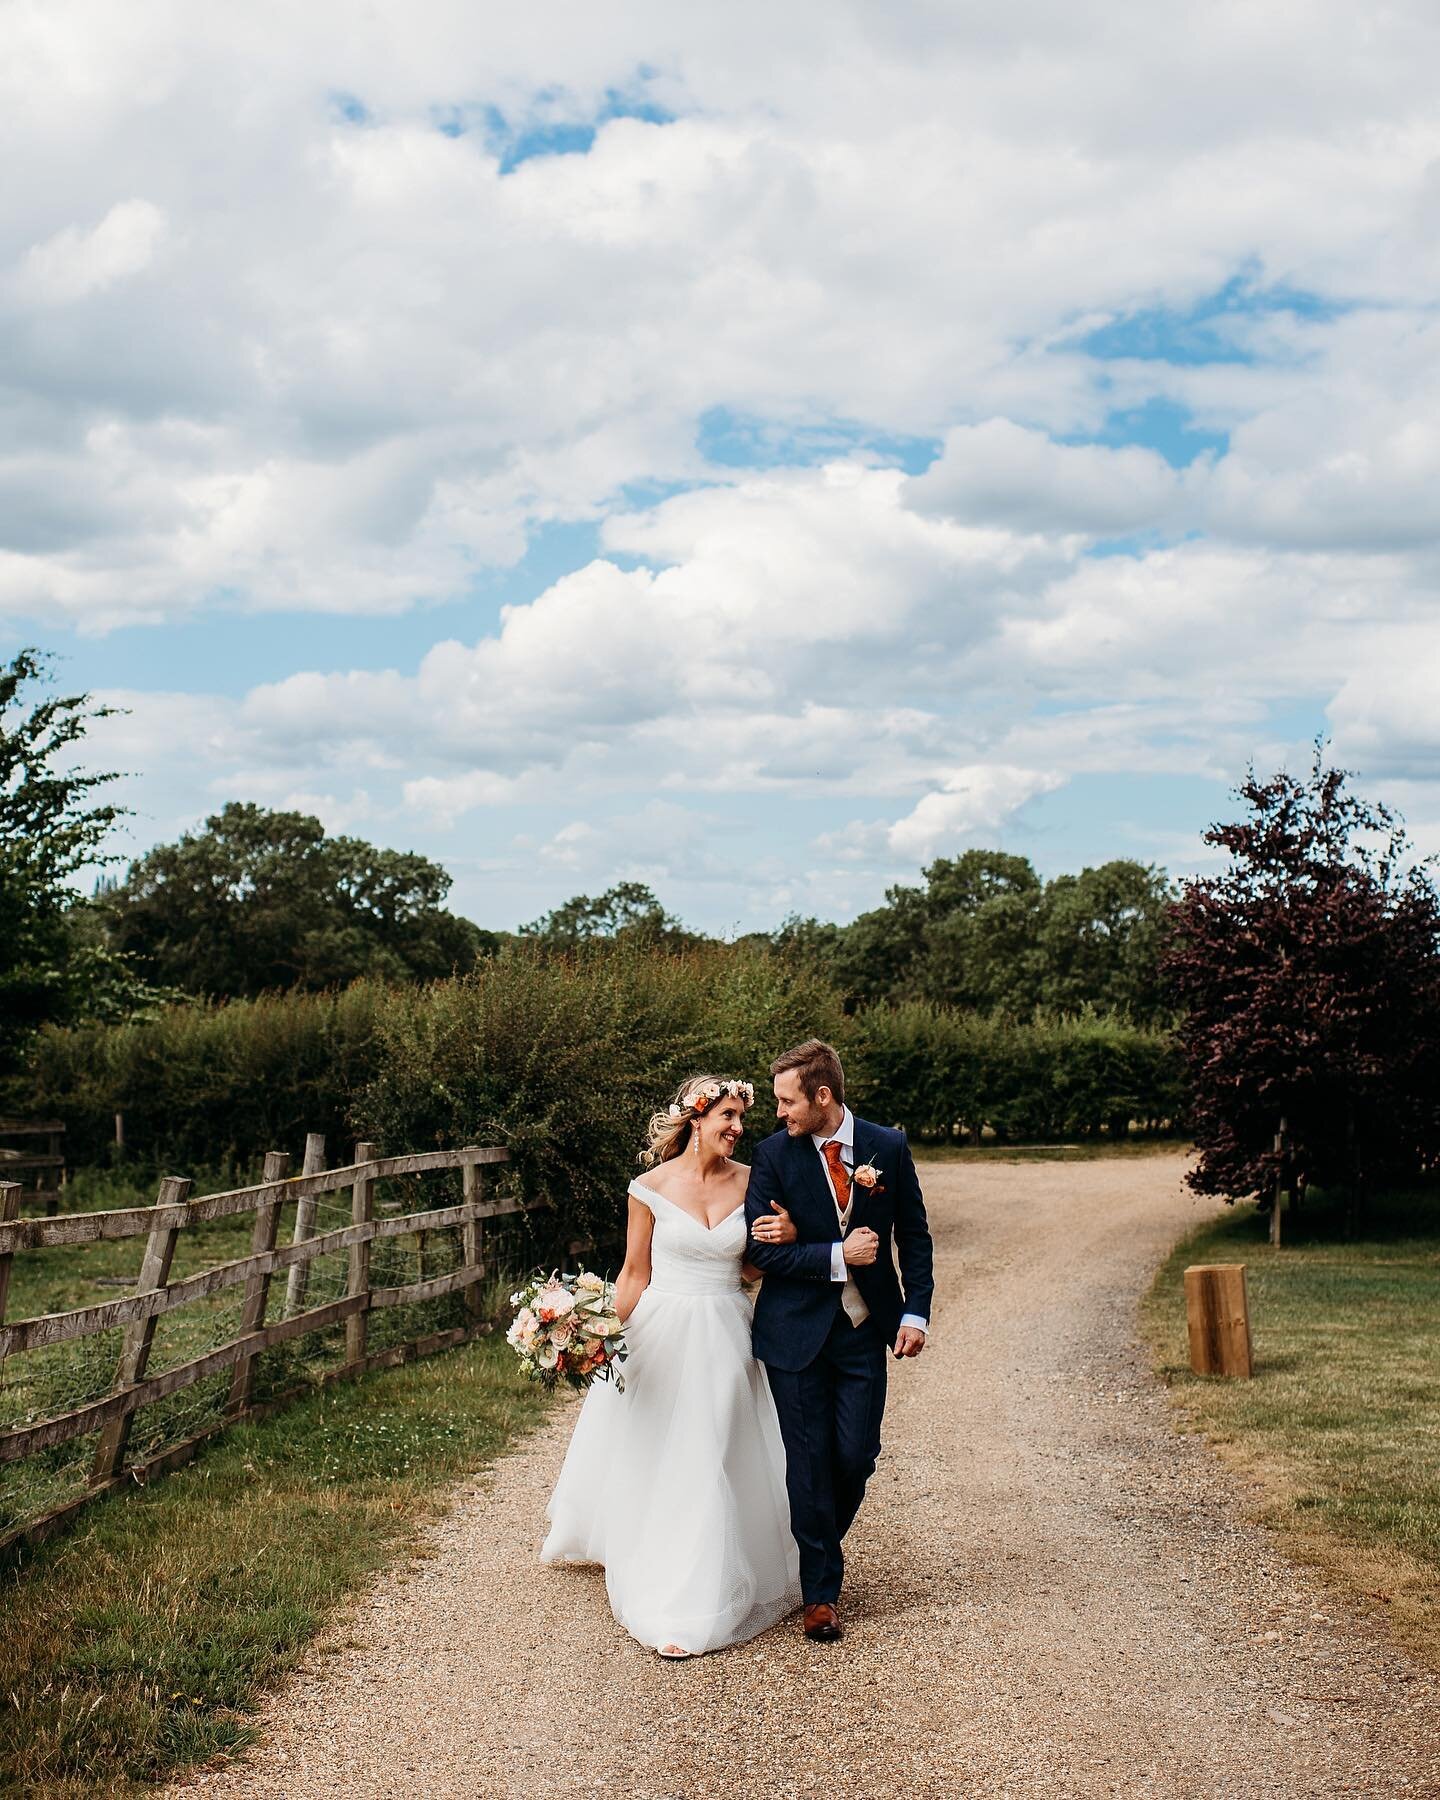 I know I keep saying I&rsquo;m not going to post anymore wedding content on this account, but&hellip;I LIED! 😜
But just one for today - if you want to see more of Ellie and Alastair&rsquo;s beautiful wedding, you&rsquo;ll have to head over to my wed